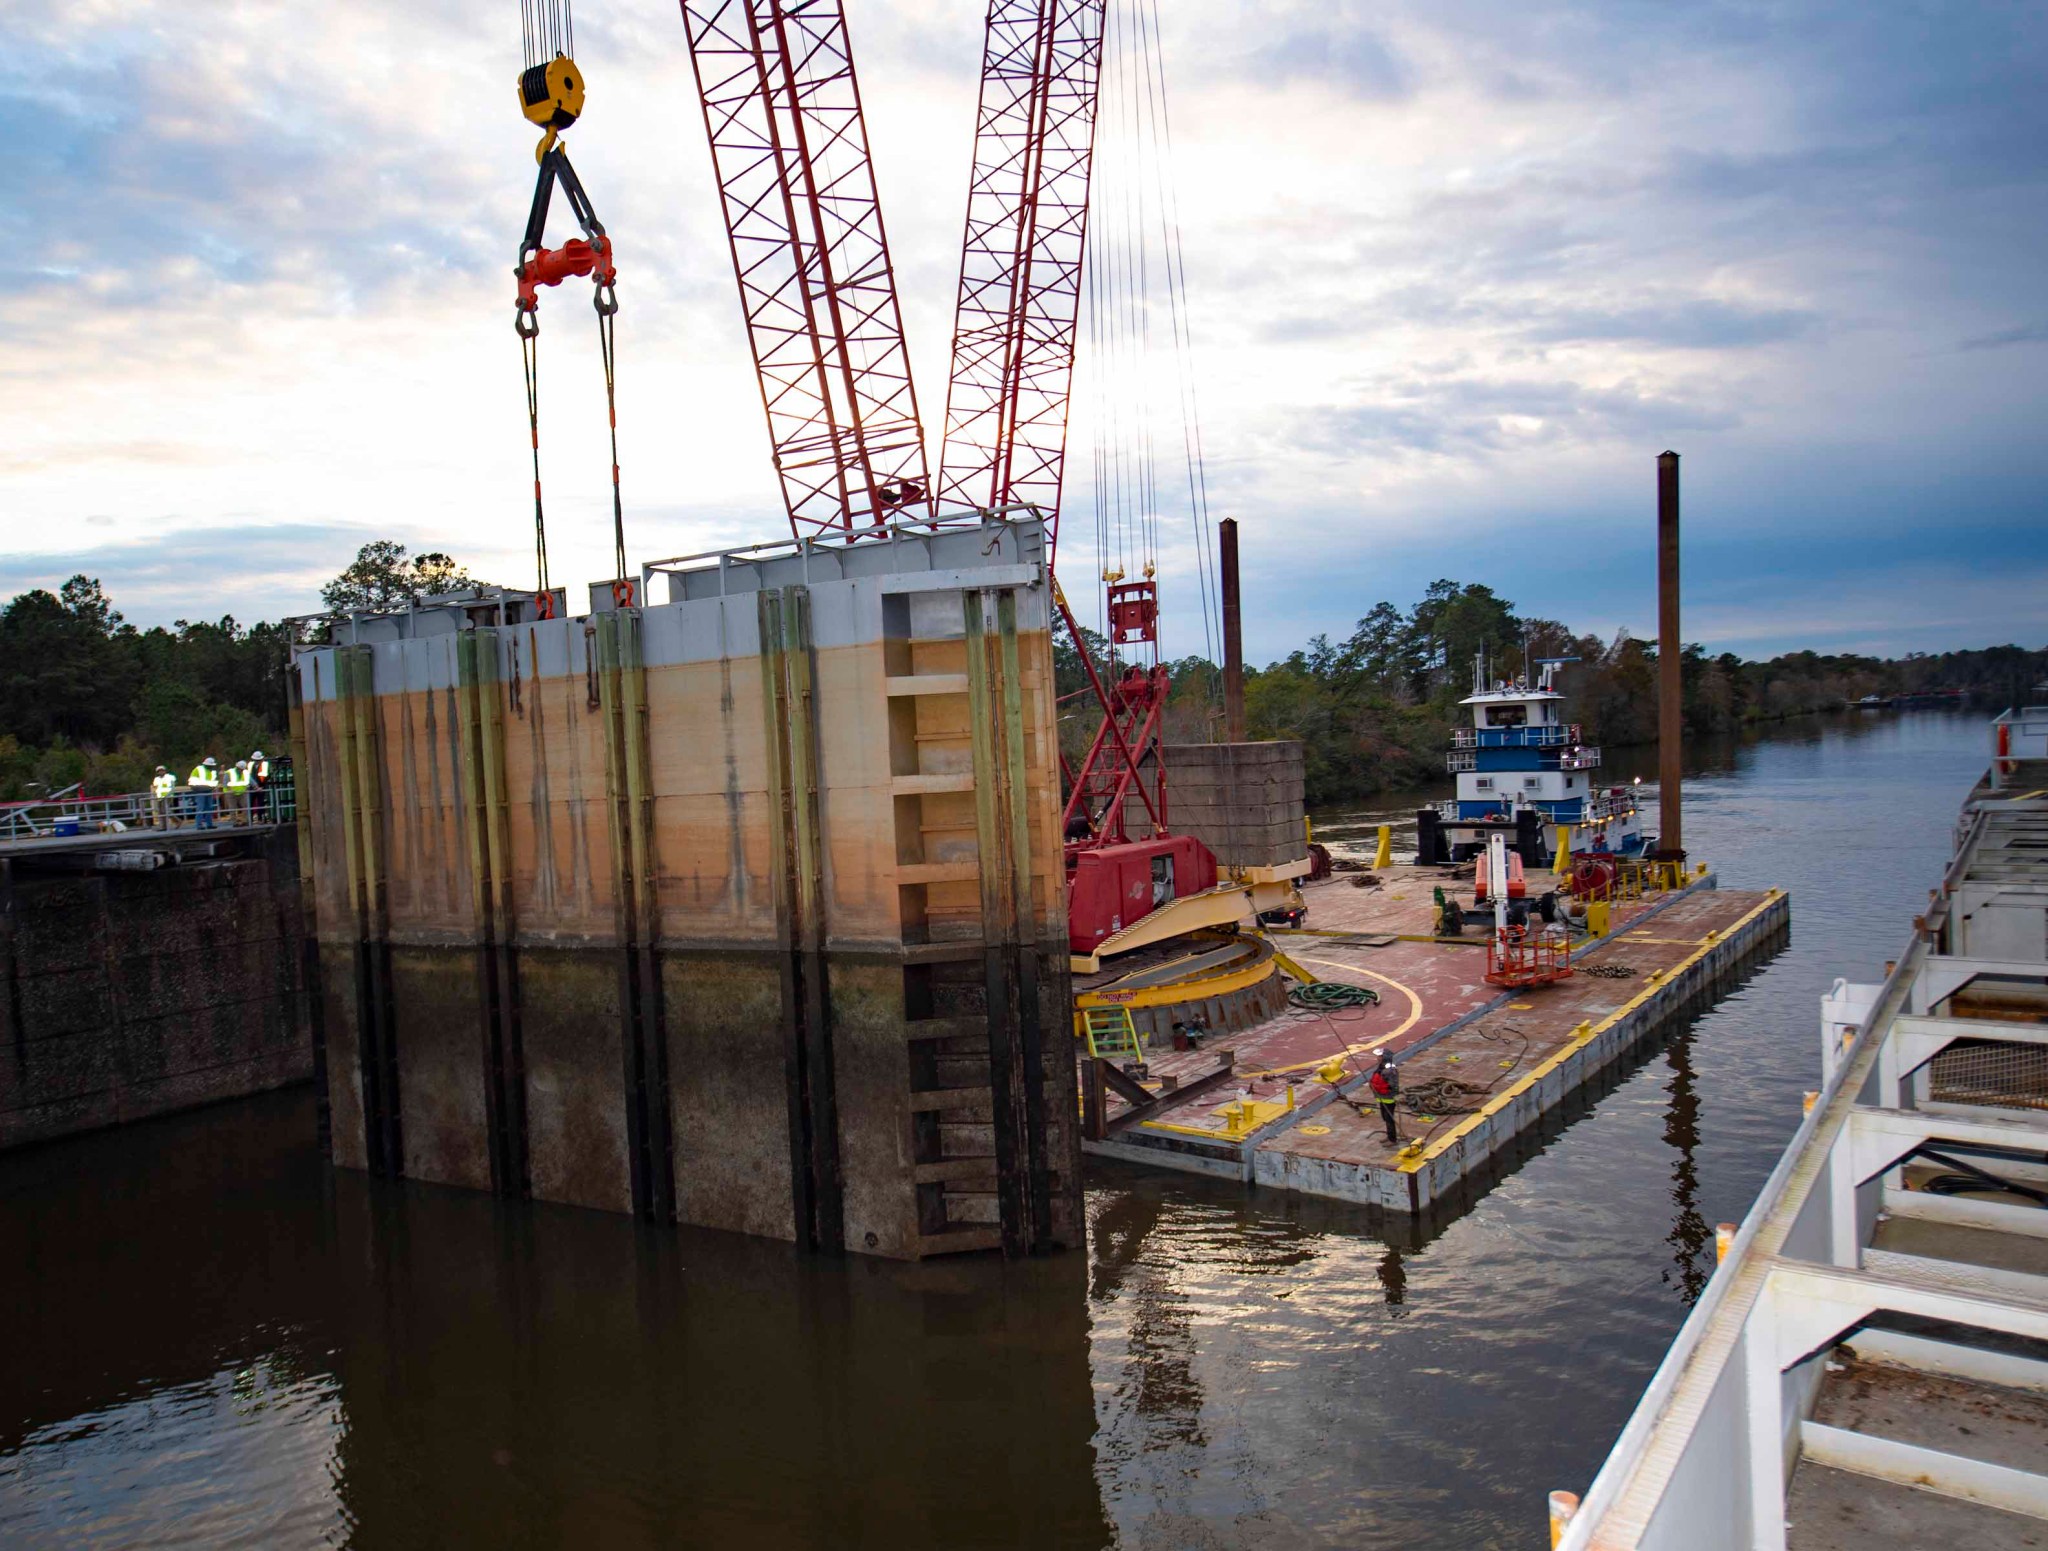 Crews use a crane on a floating barge to lift the lower south gate of the navigation lock system at NASA’s Stennis Space Center